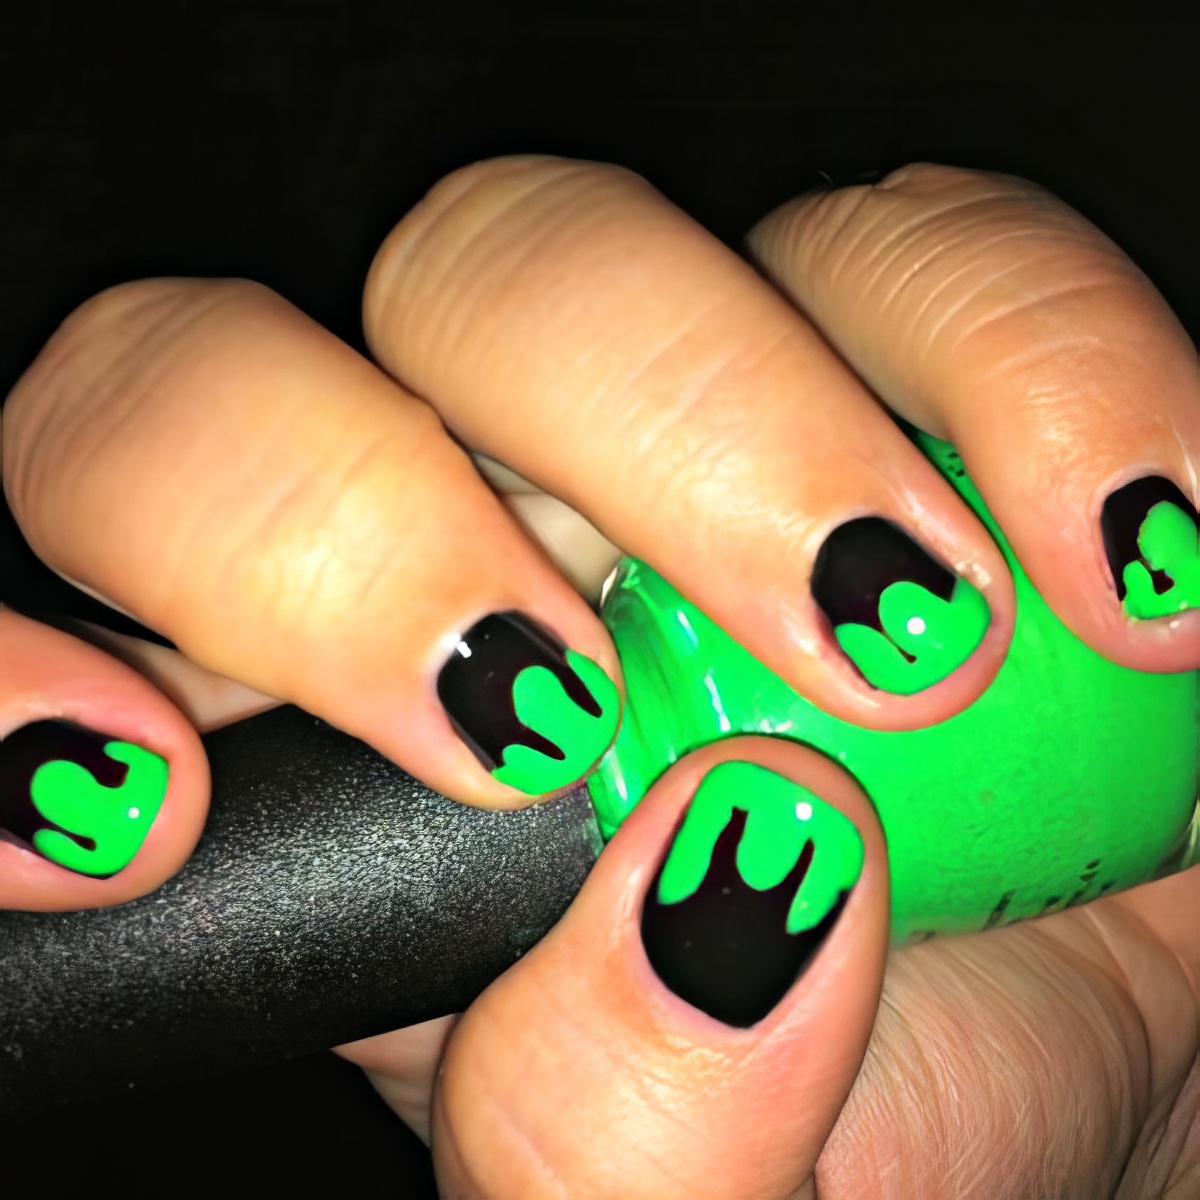 Slimey and green nails this Halloween! Fun!